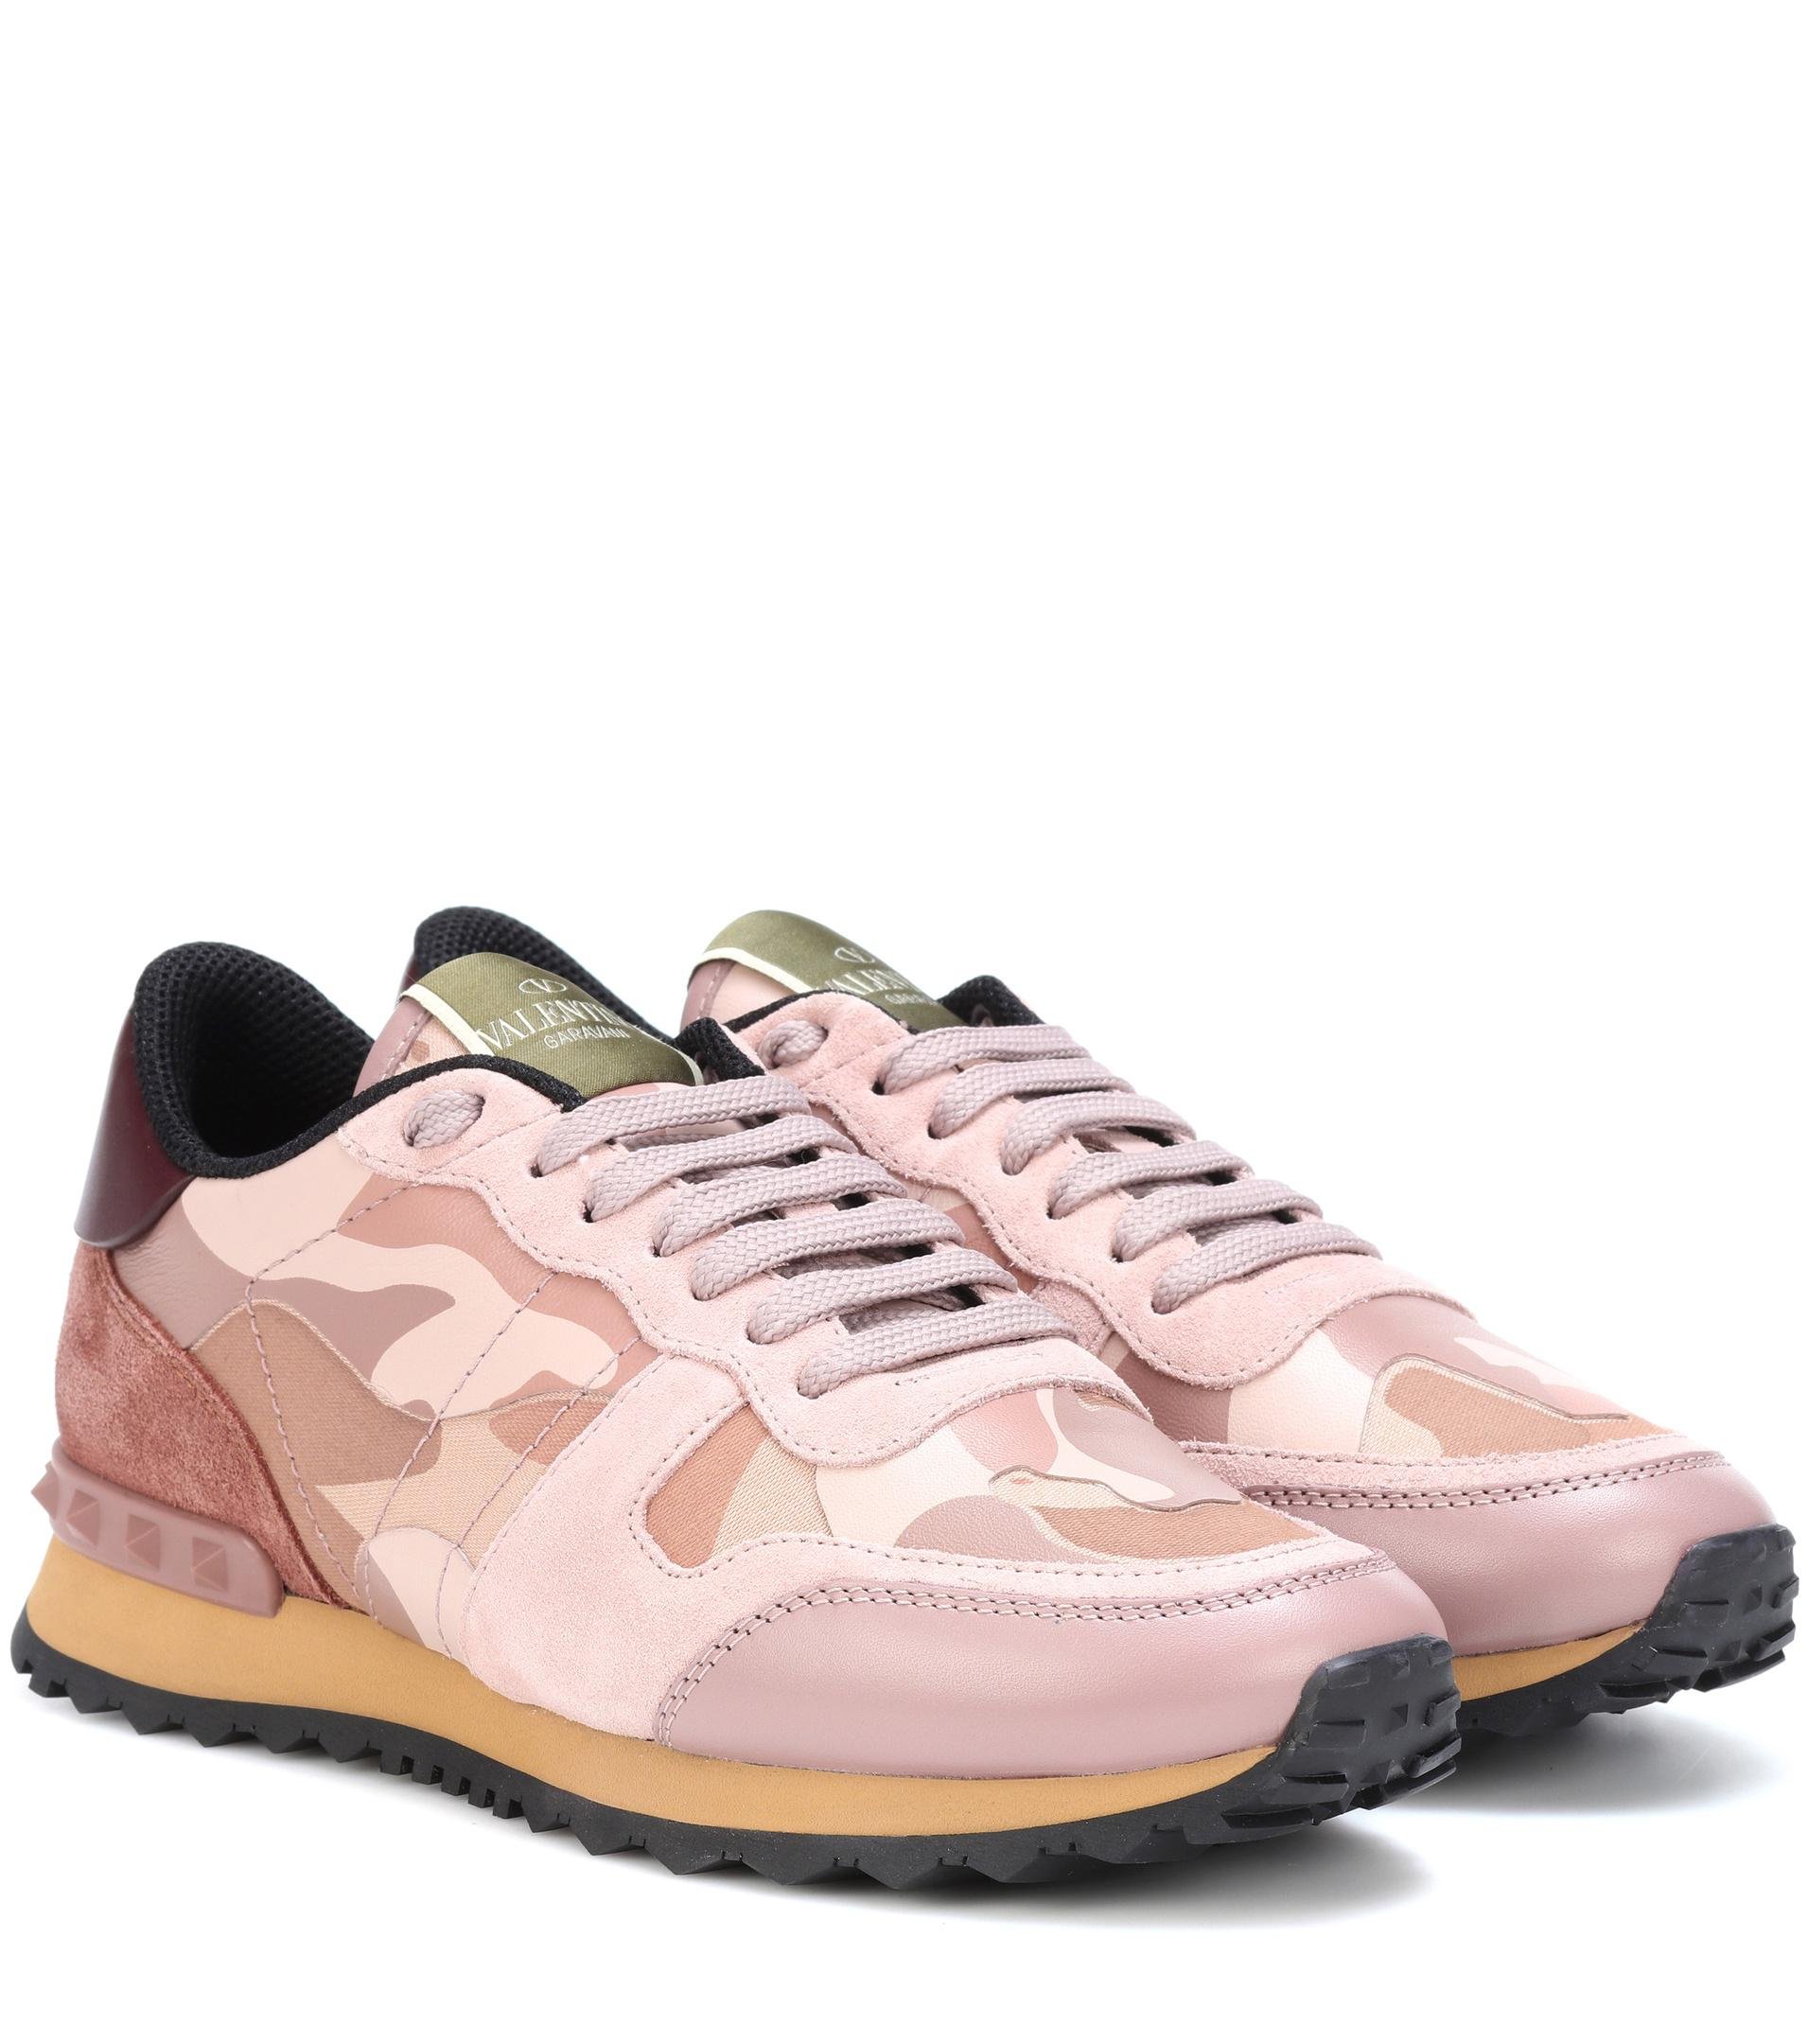 pink and black valentino trainers \u003e Up 